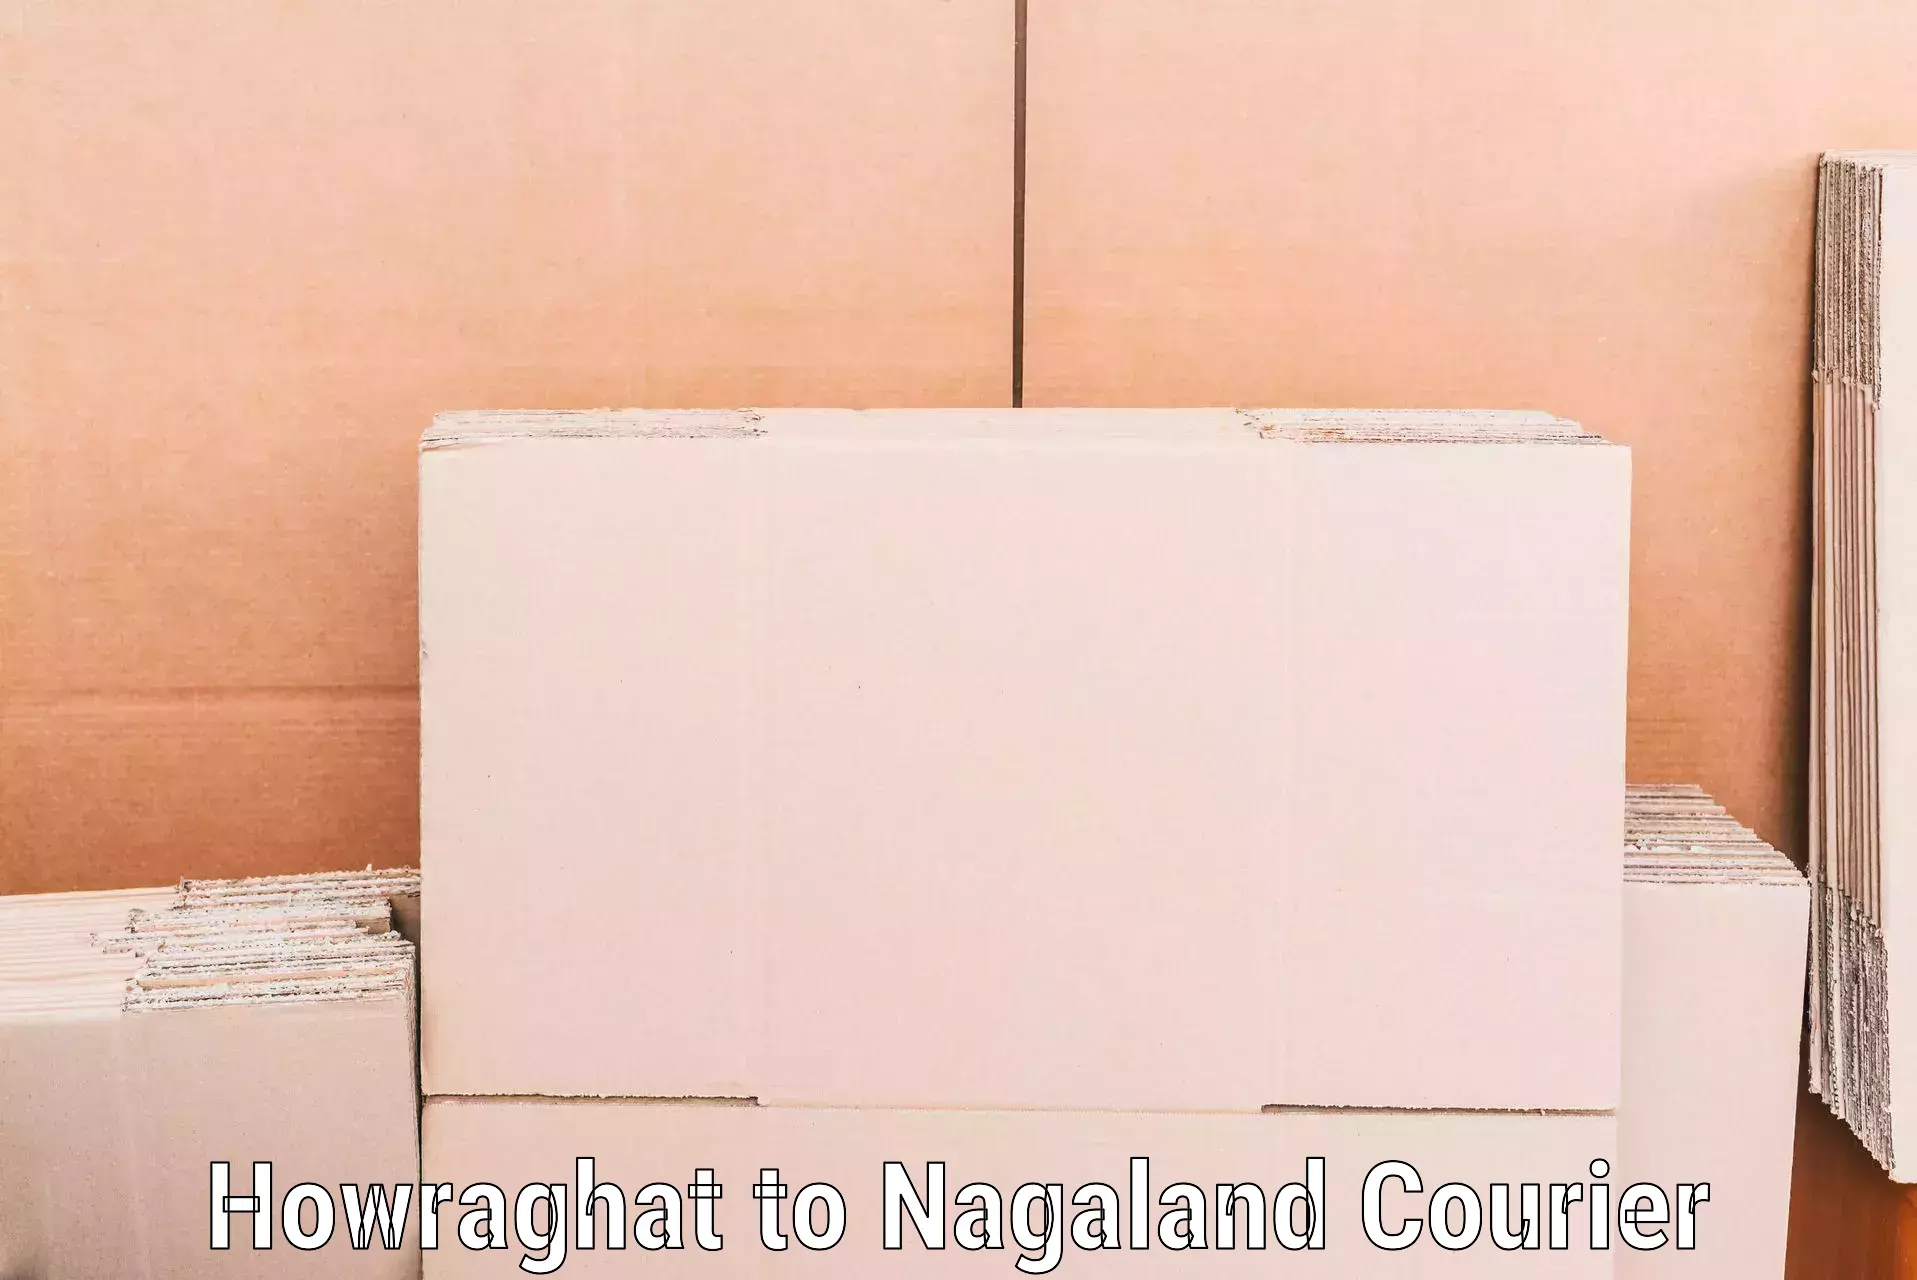 Quality household movers Howraghat to Nagaland